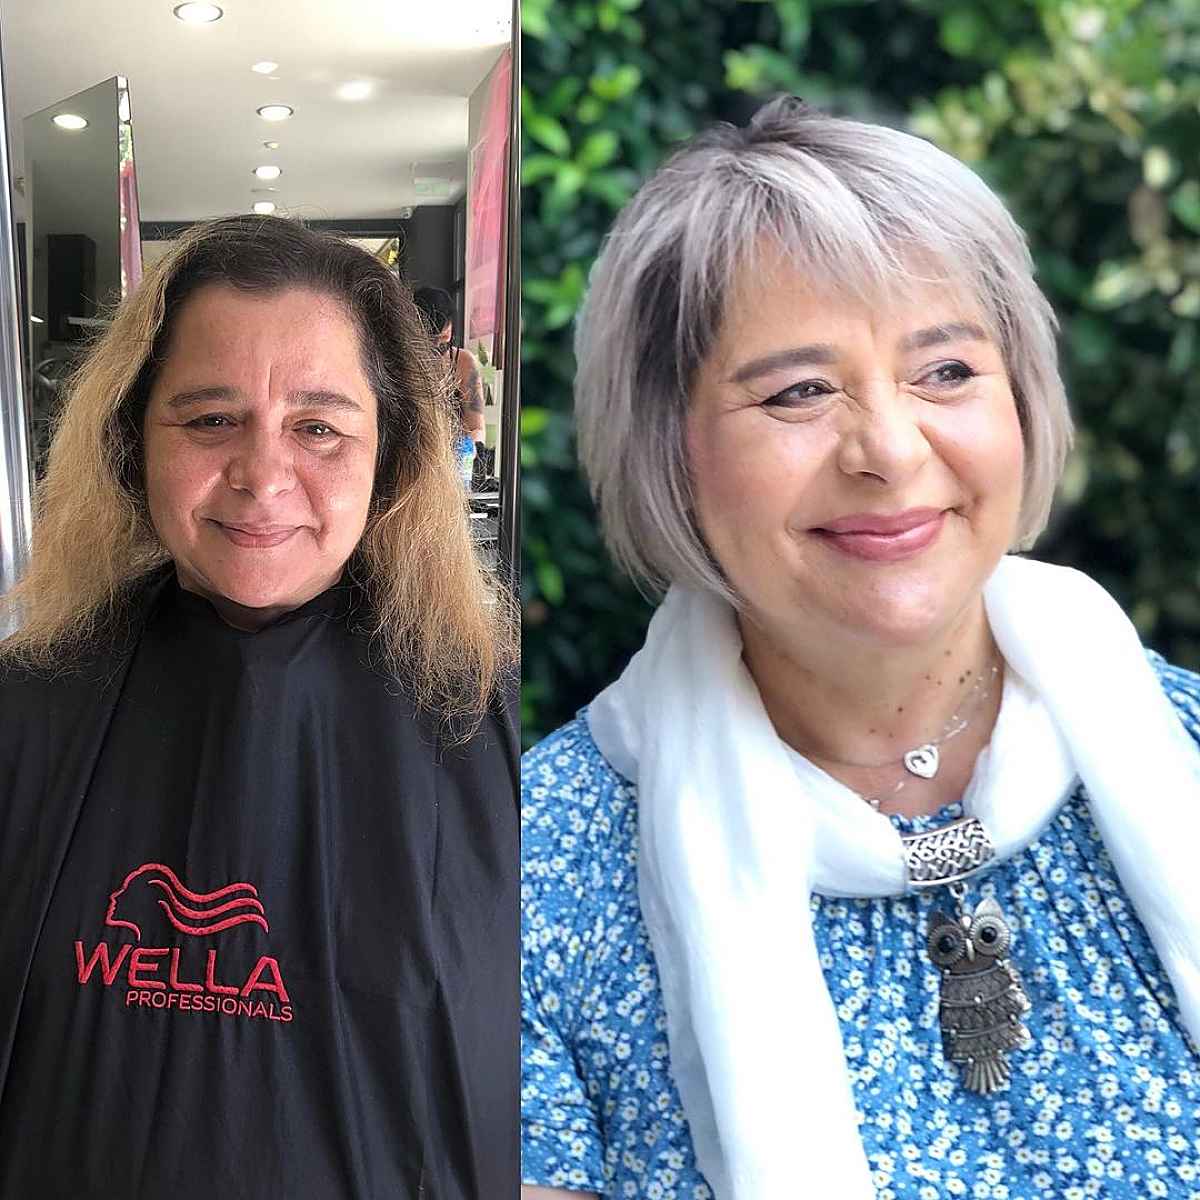 Layered Bob for Women Over 60 with Chubby Cheeks